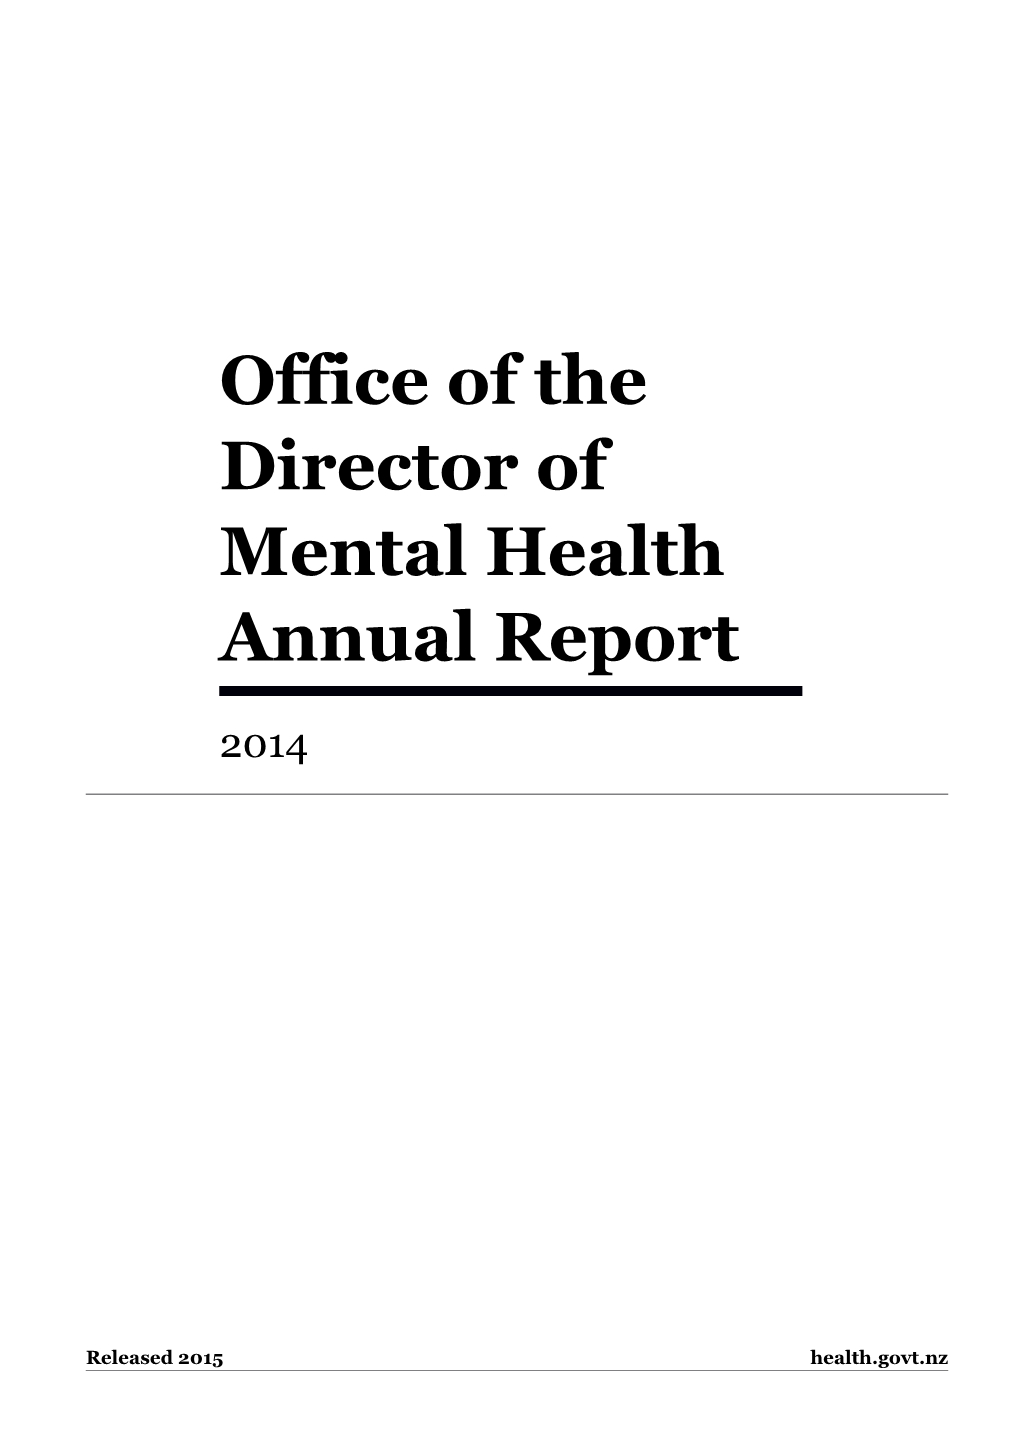 Office of the Director of Mental Health Annual Report 2104